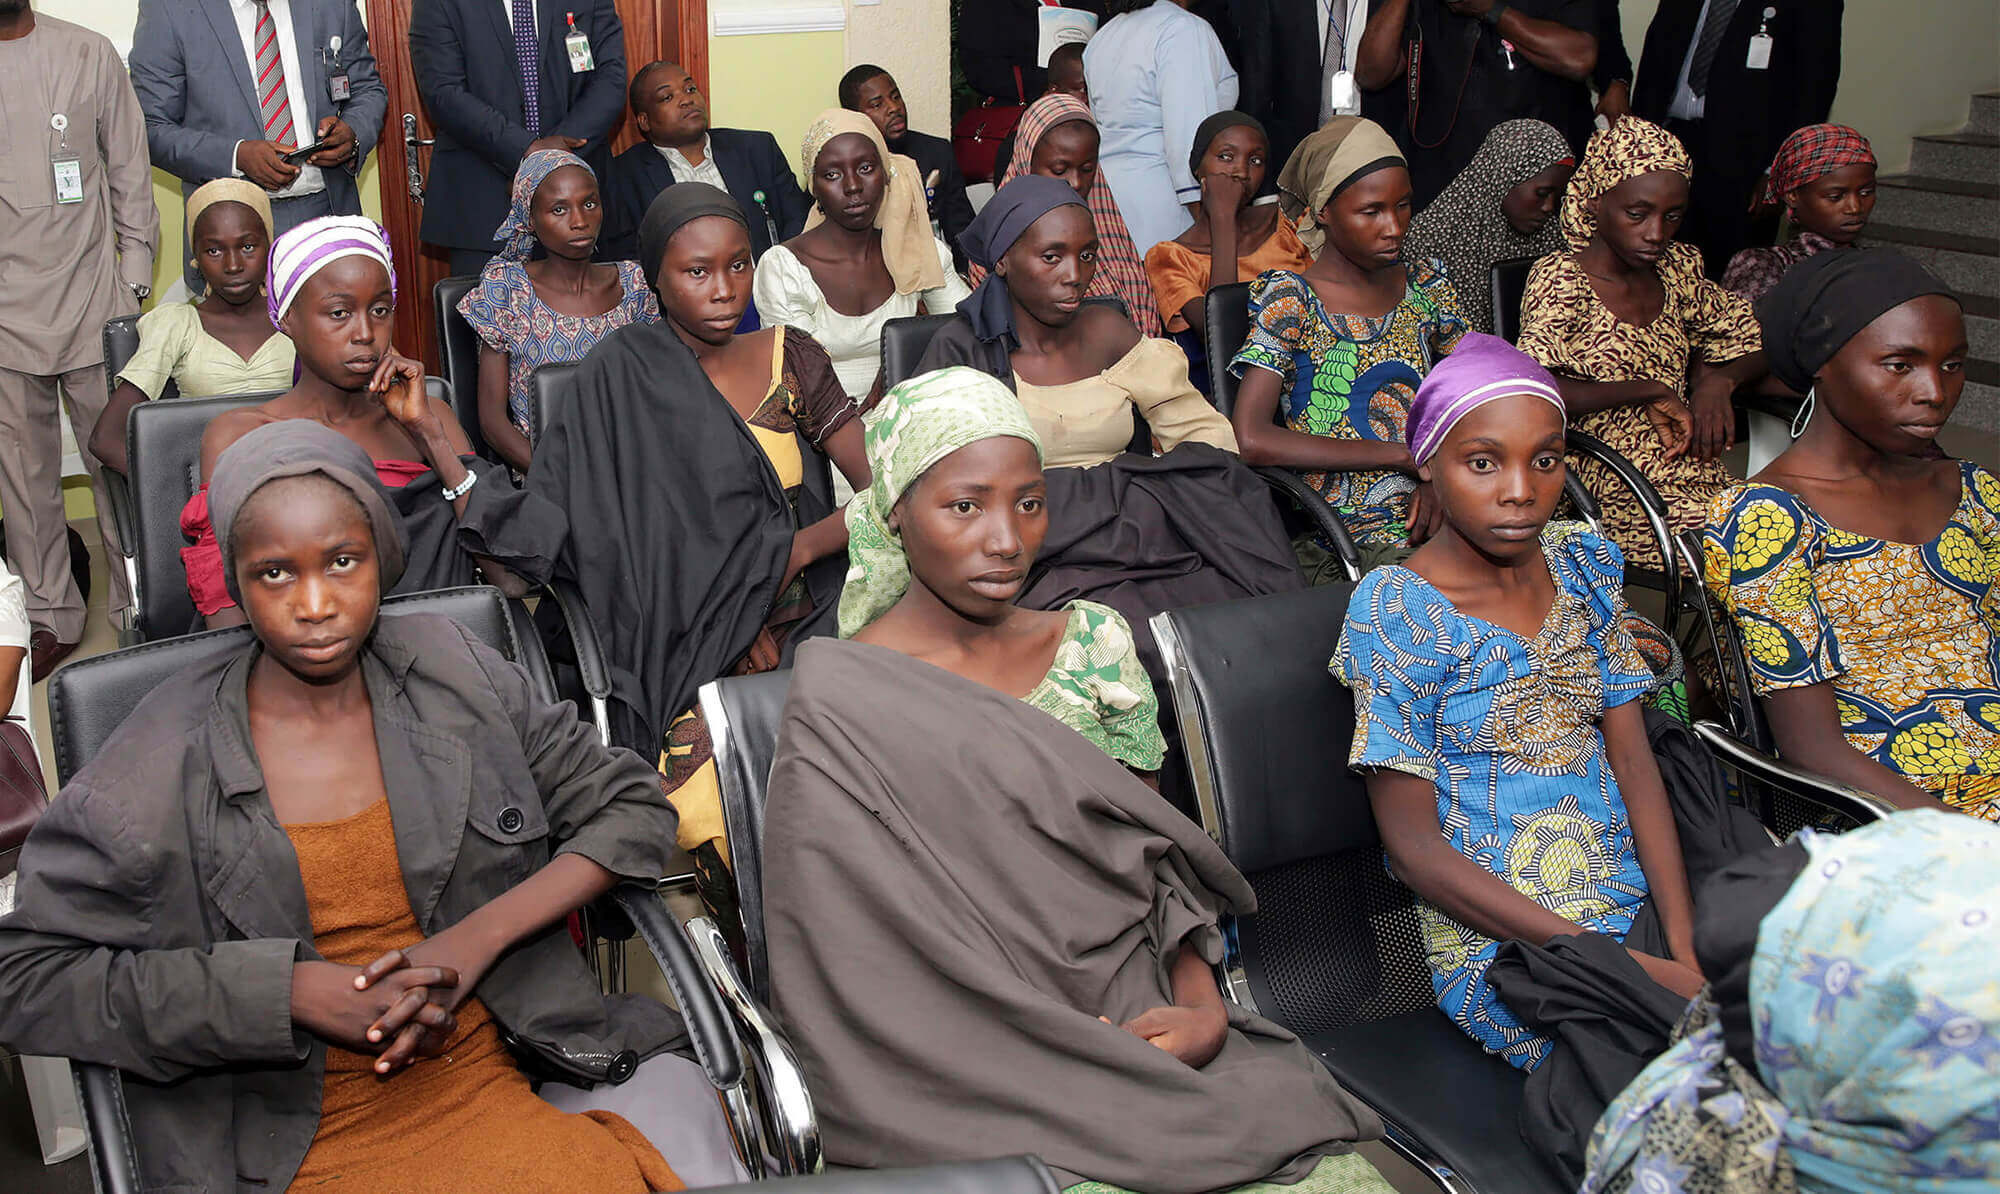 Image of some of the released Chibok girls